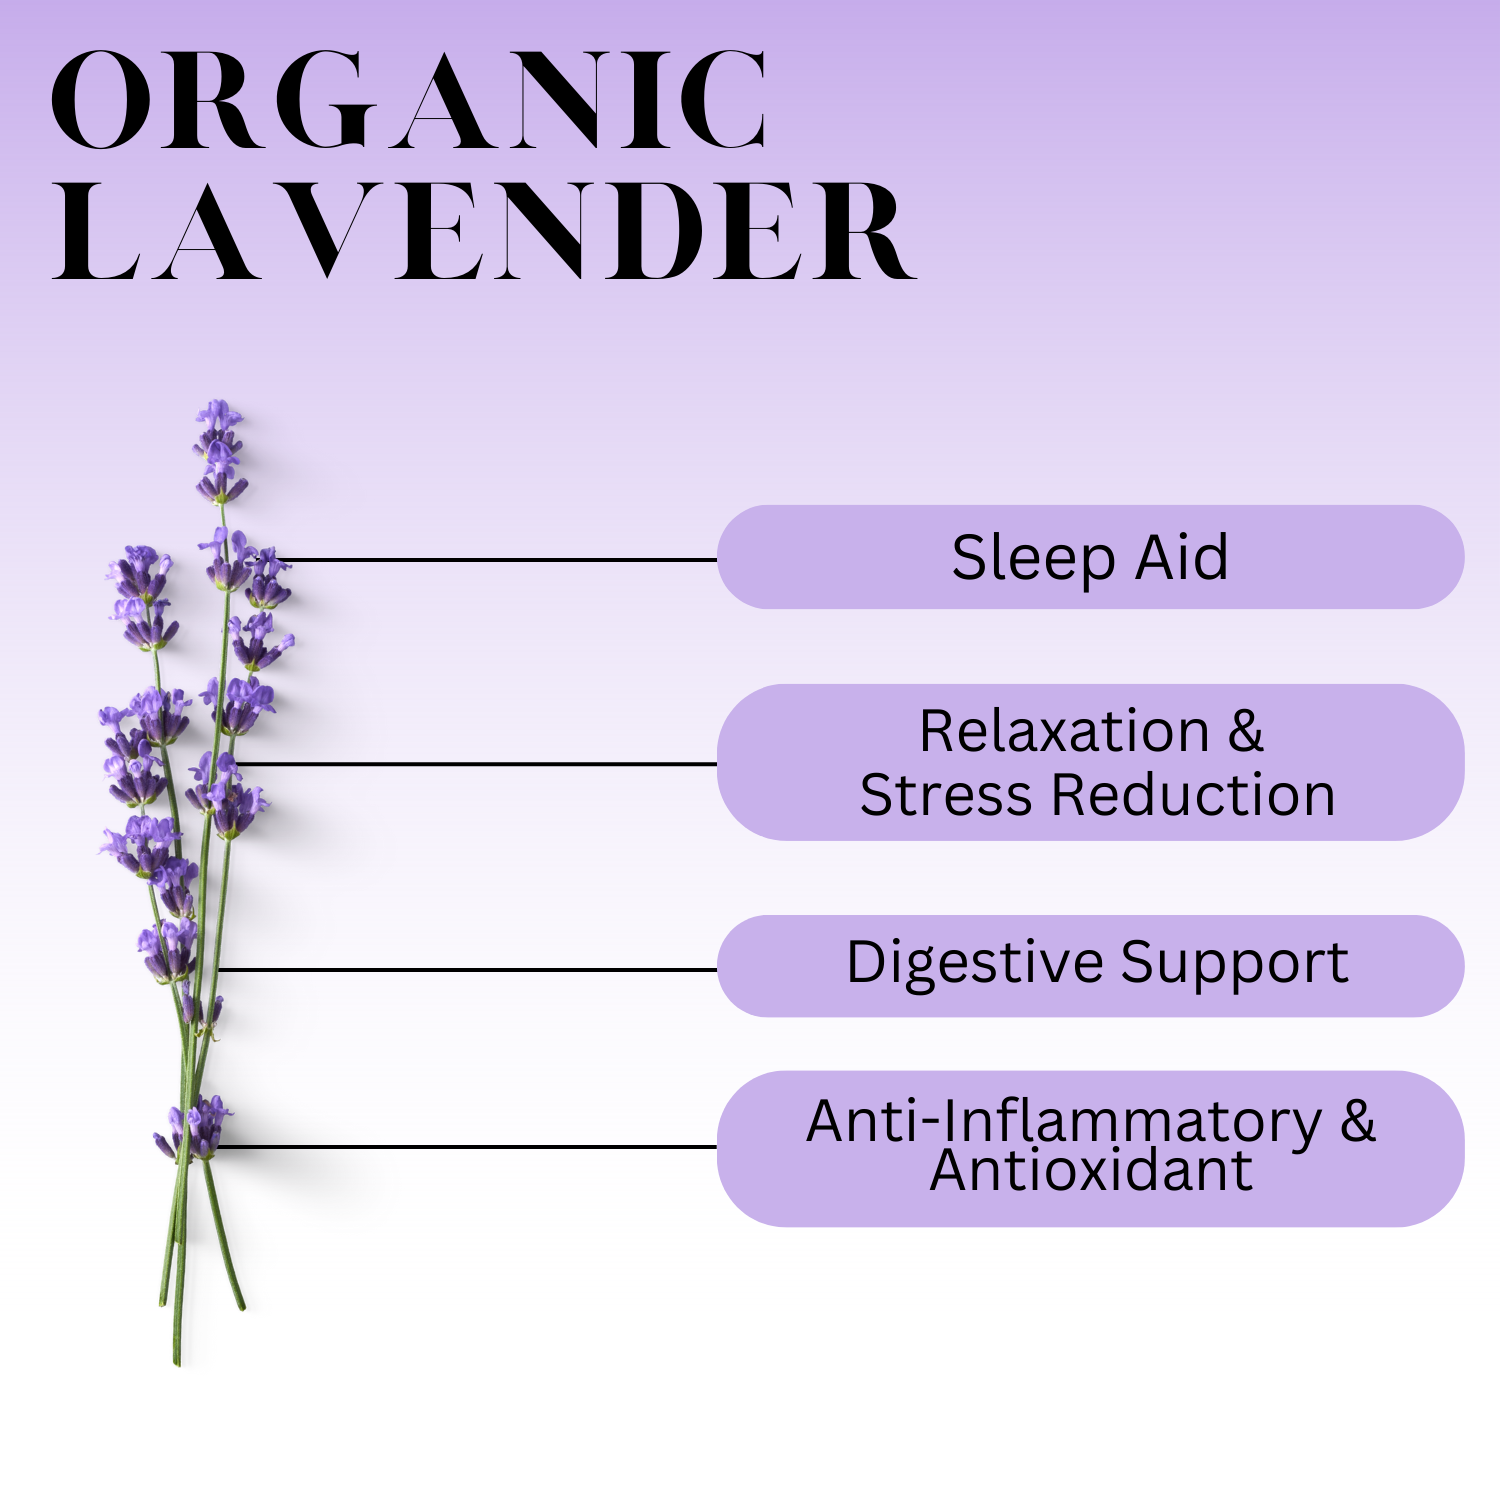 lavender health benefits chart: sleep aid, relaxation and stress reduction, digestive support, anti inflammatory, and antioxidant 